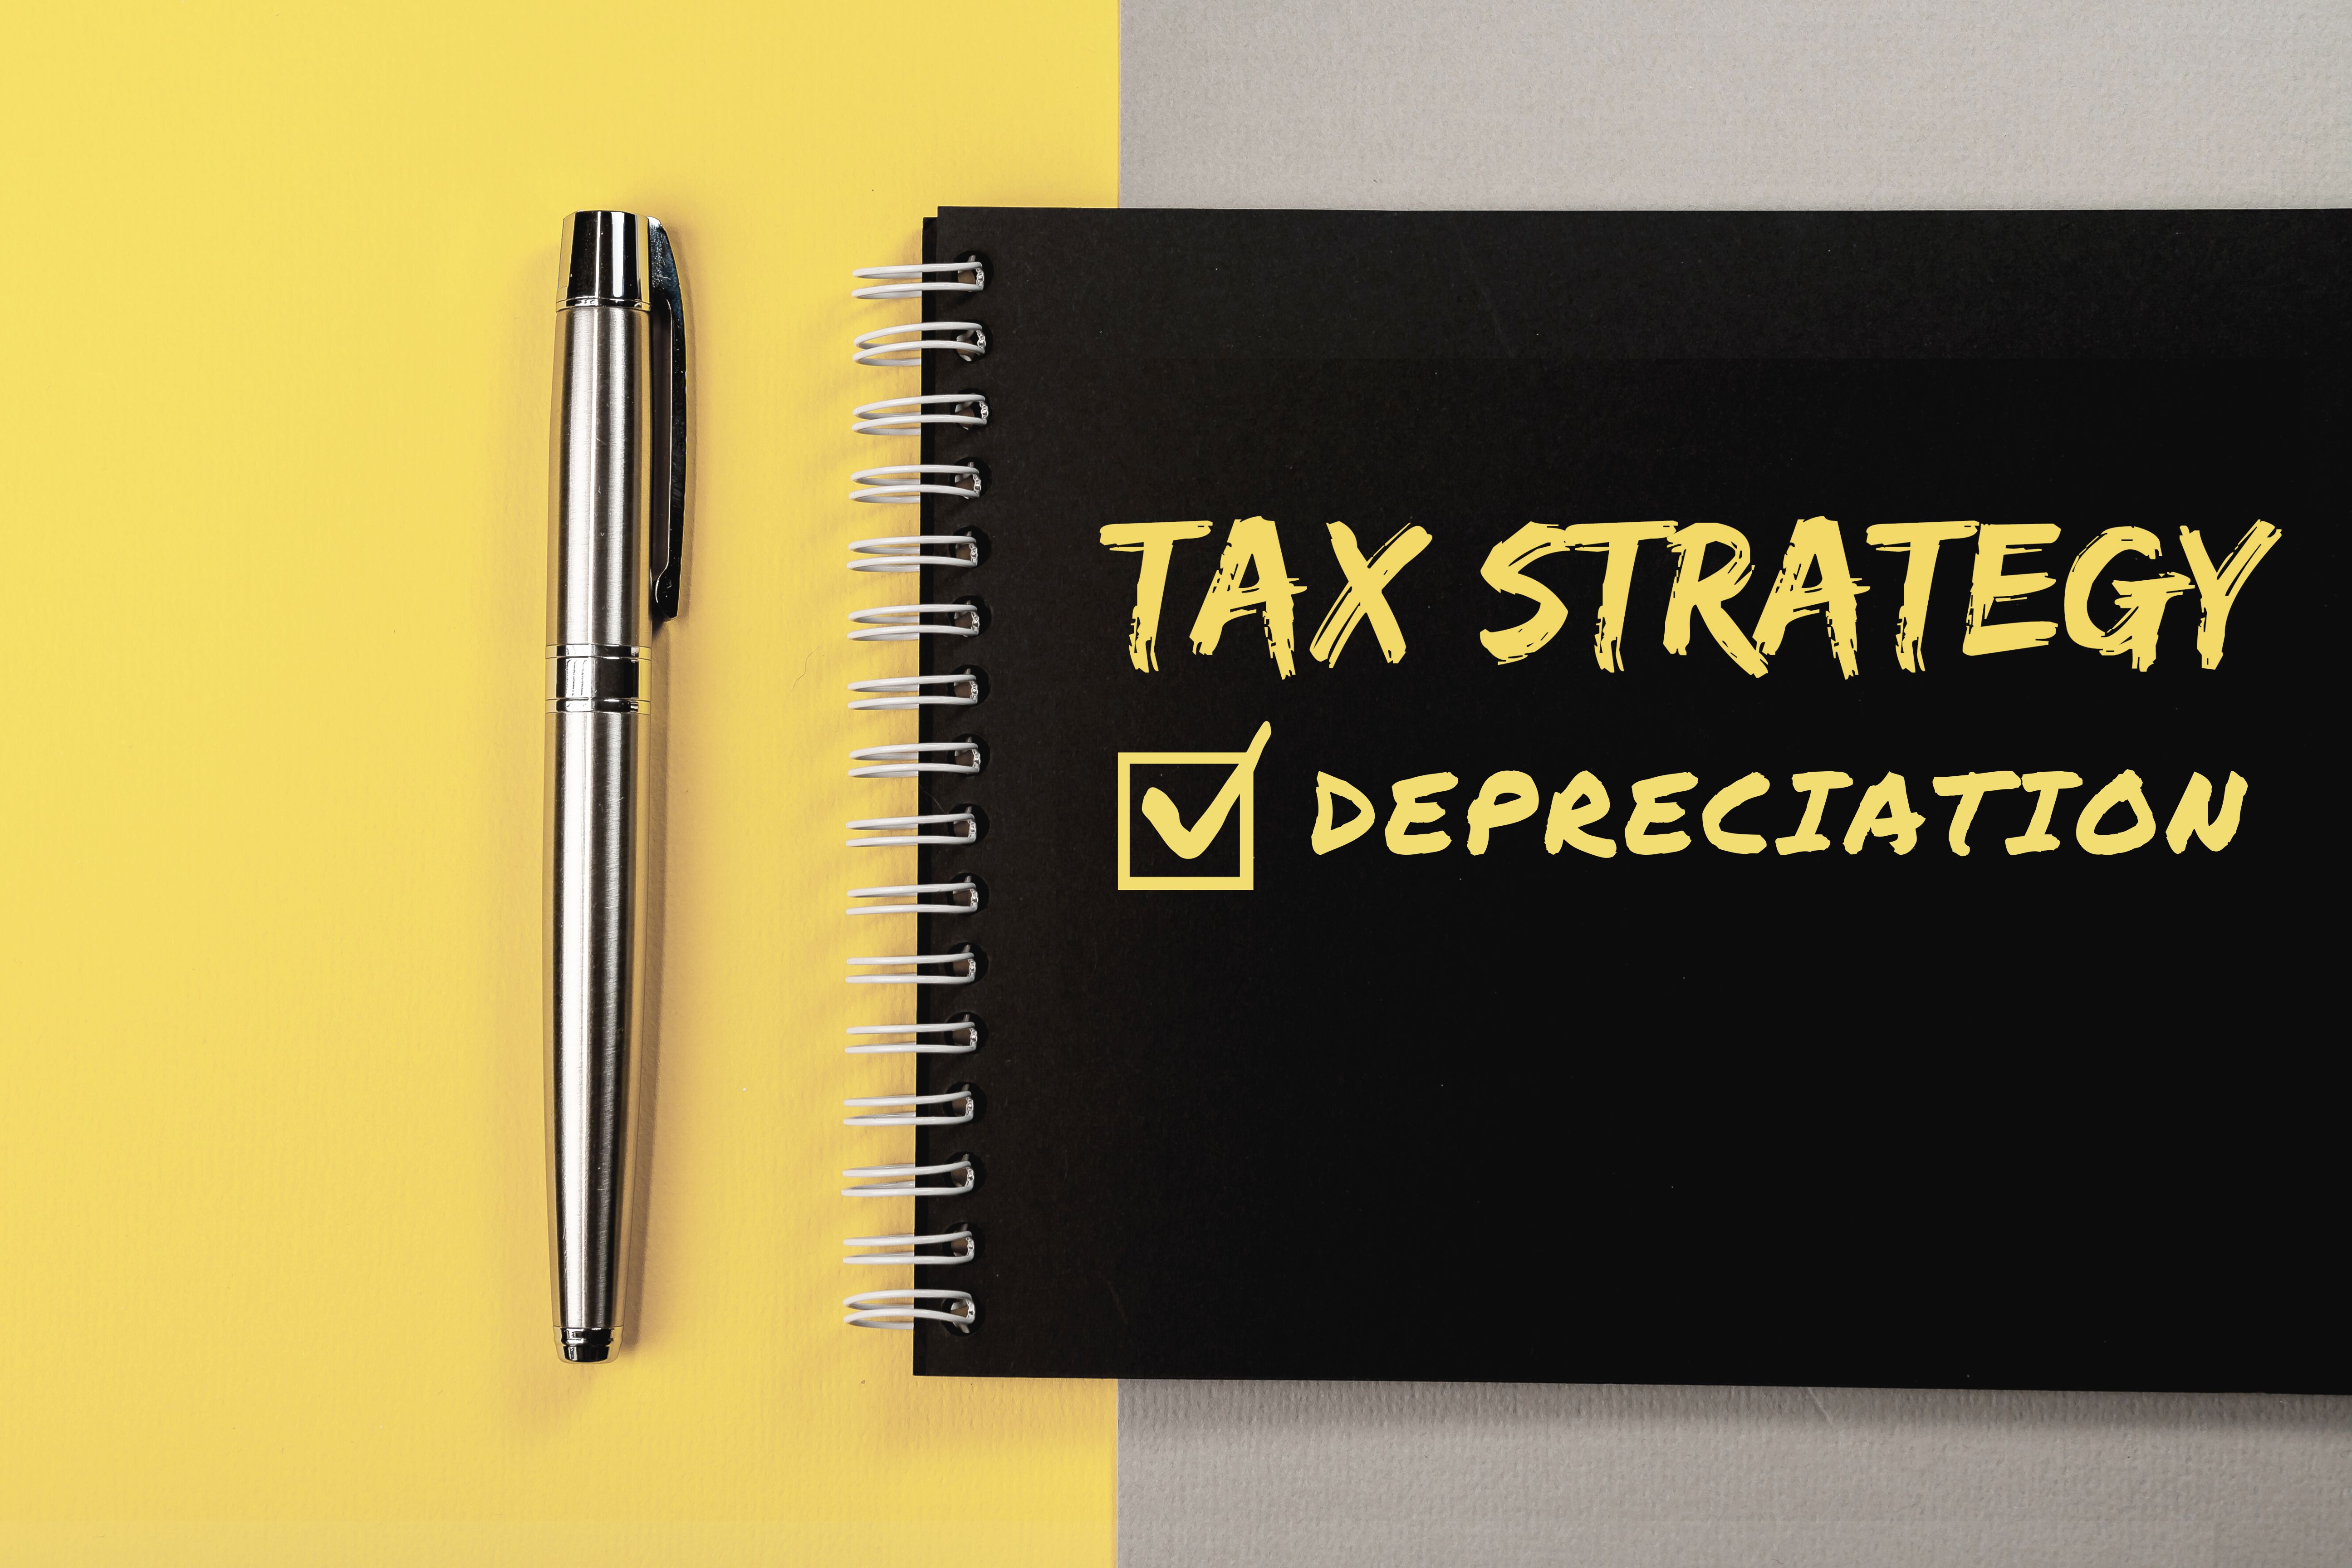 Maximizing Depreciation for the Best Tax Position